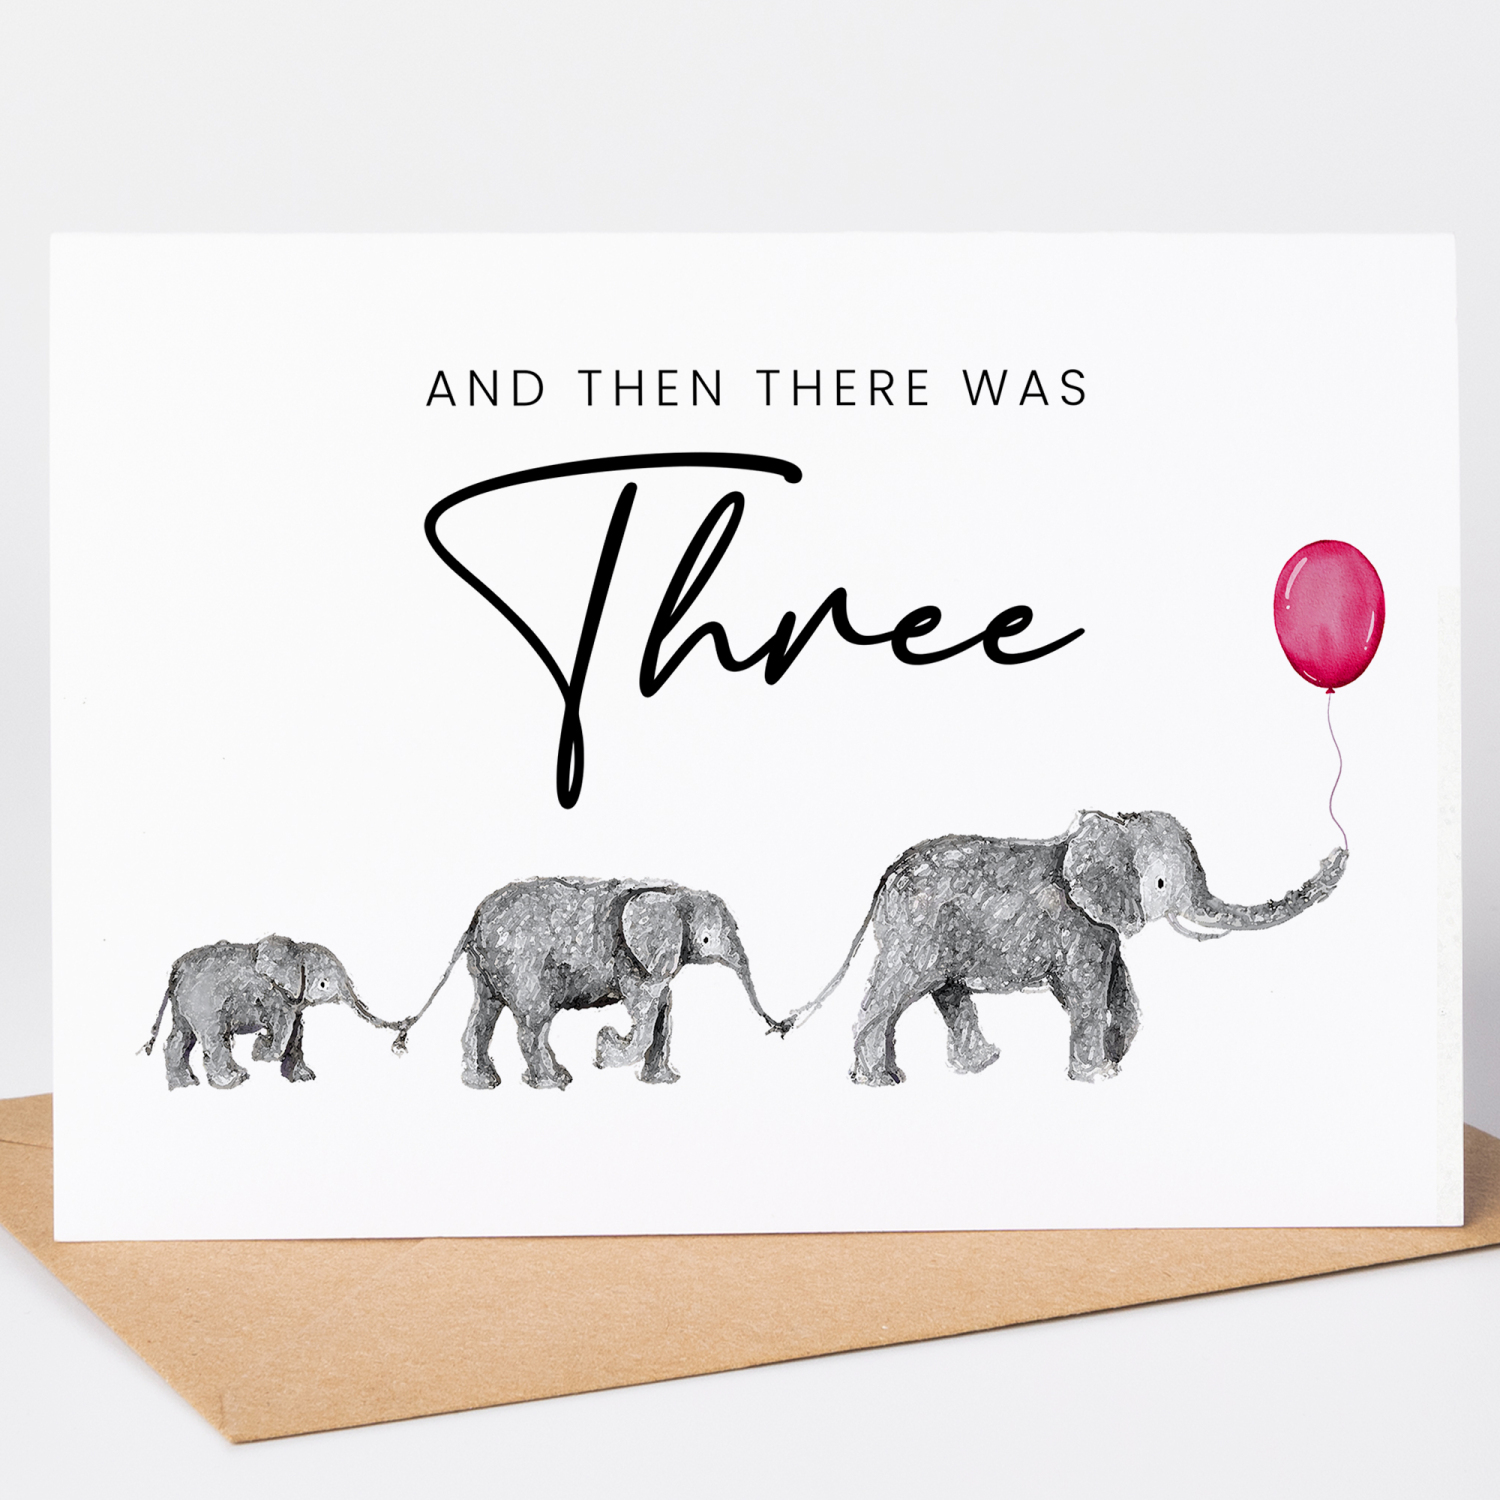 And then there was three, pregnancy announcement Elephant card - A6 - 4.1" x 5.8"